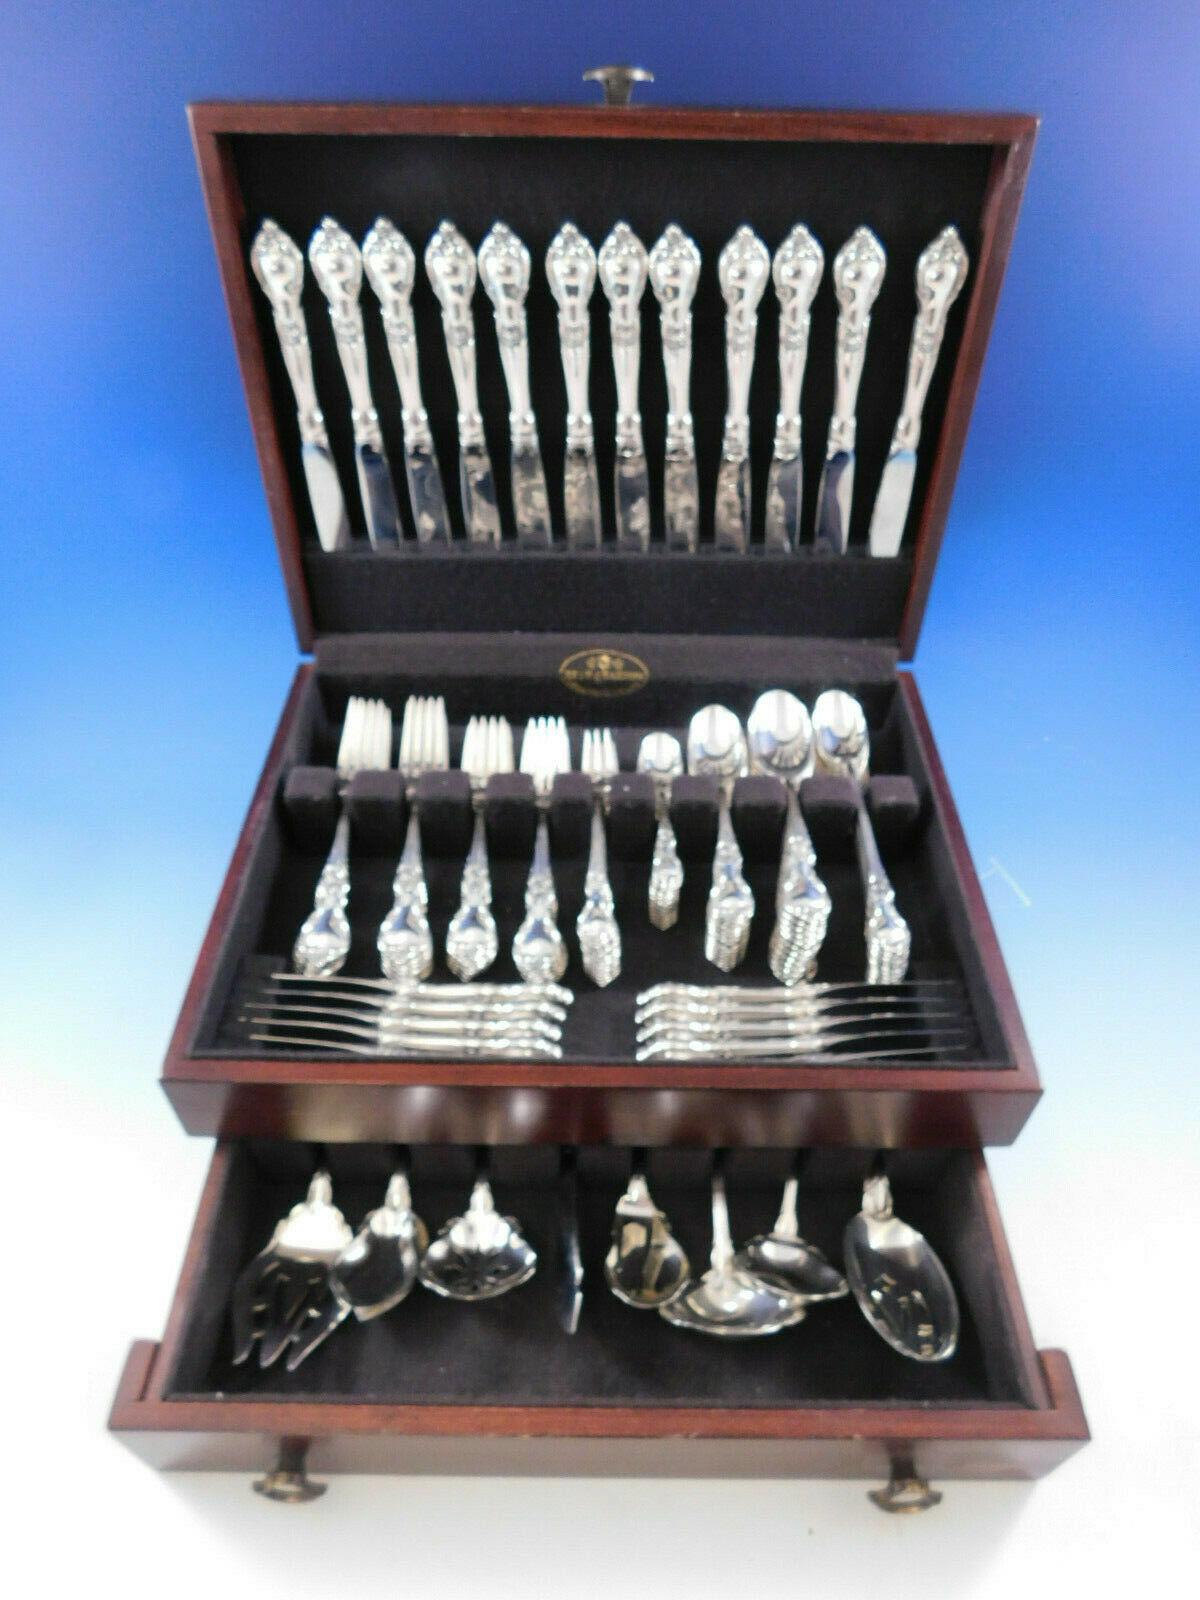 Monumental Alexandra by Lunt circa 1961 sterling silver Flatware set with timeless design, 118 pieces. This set includes:

12 knives, 9